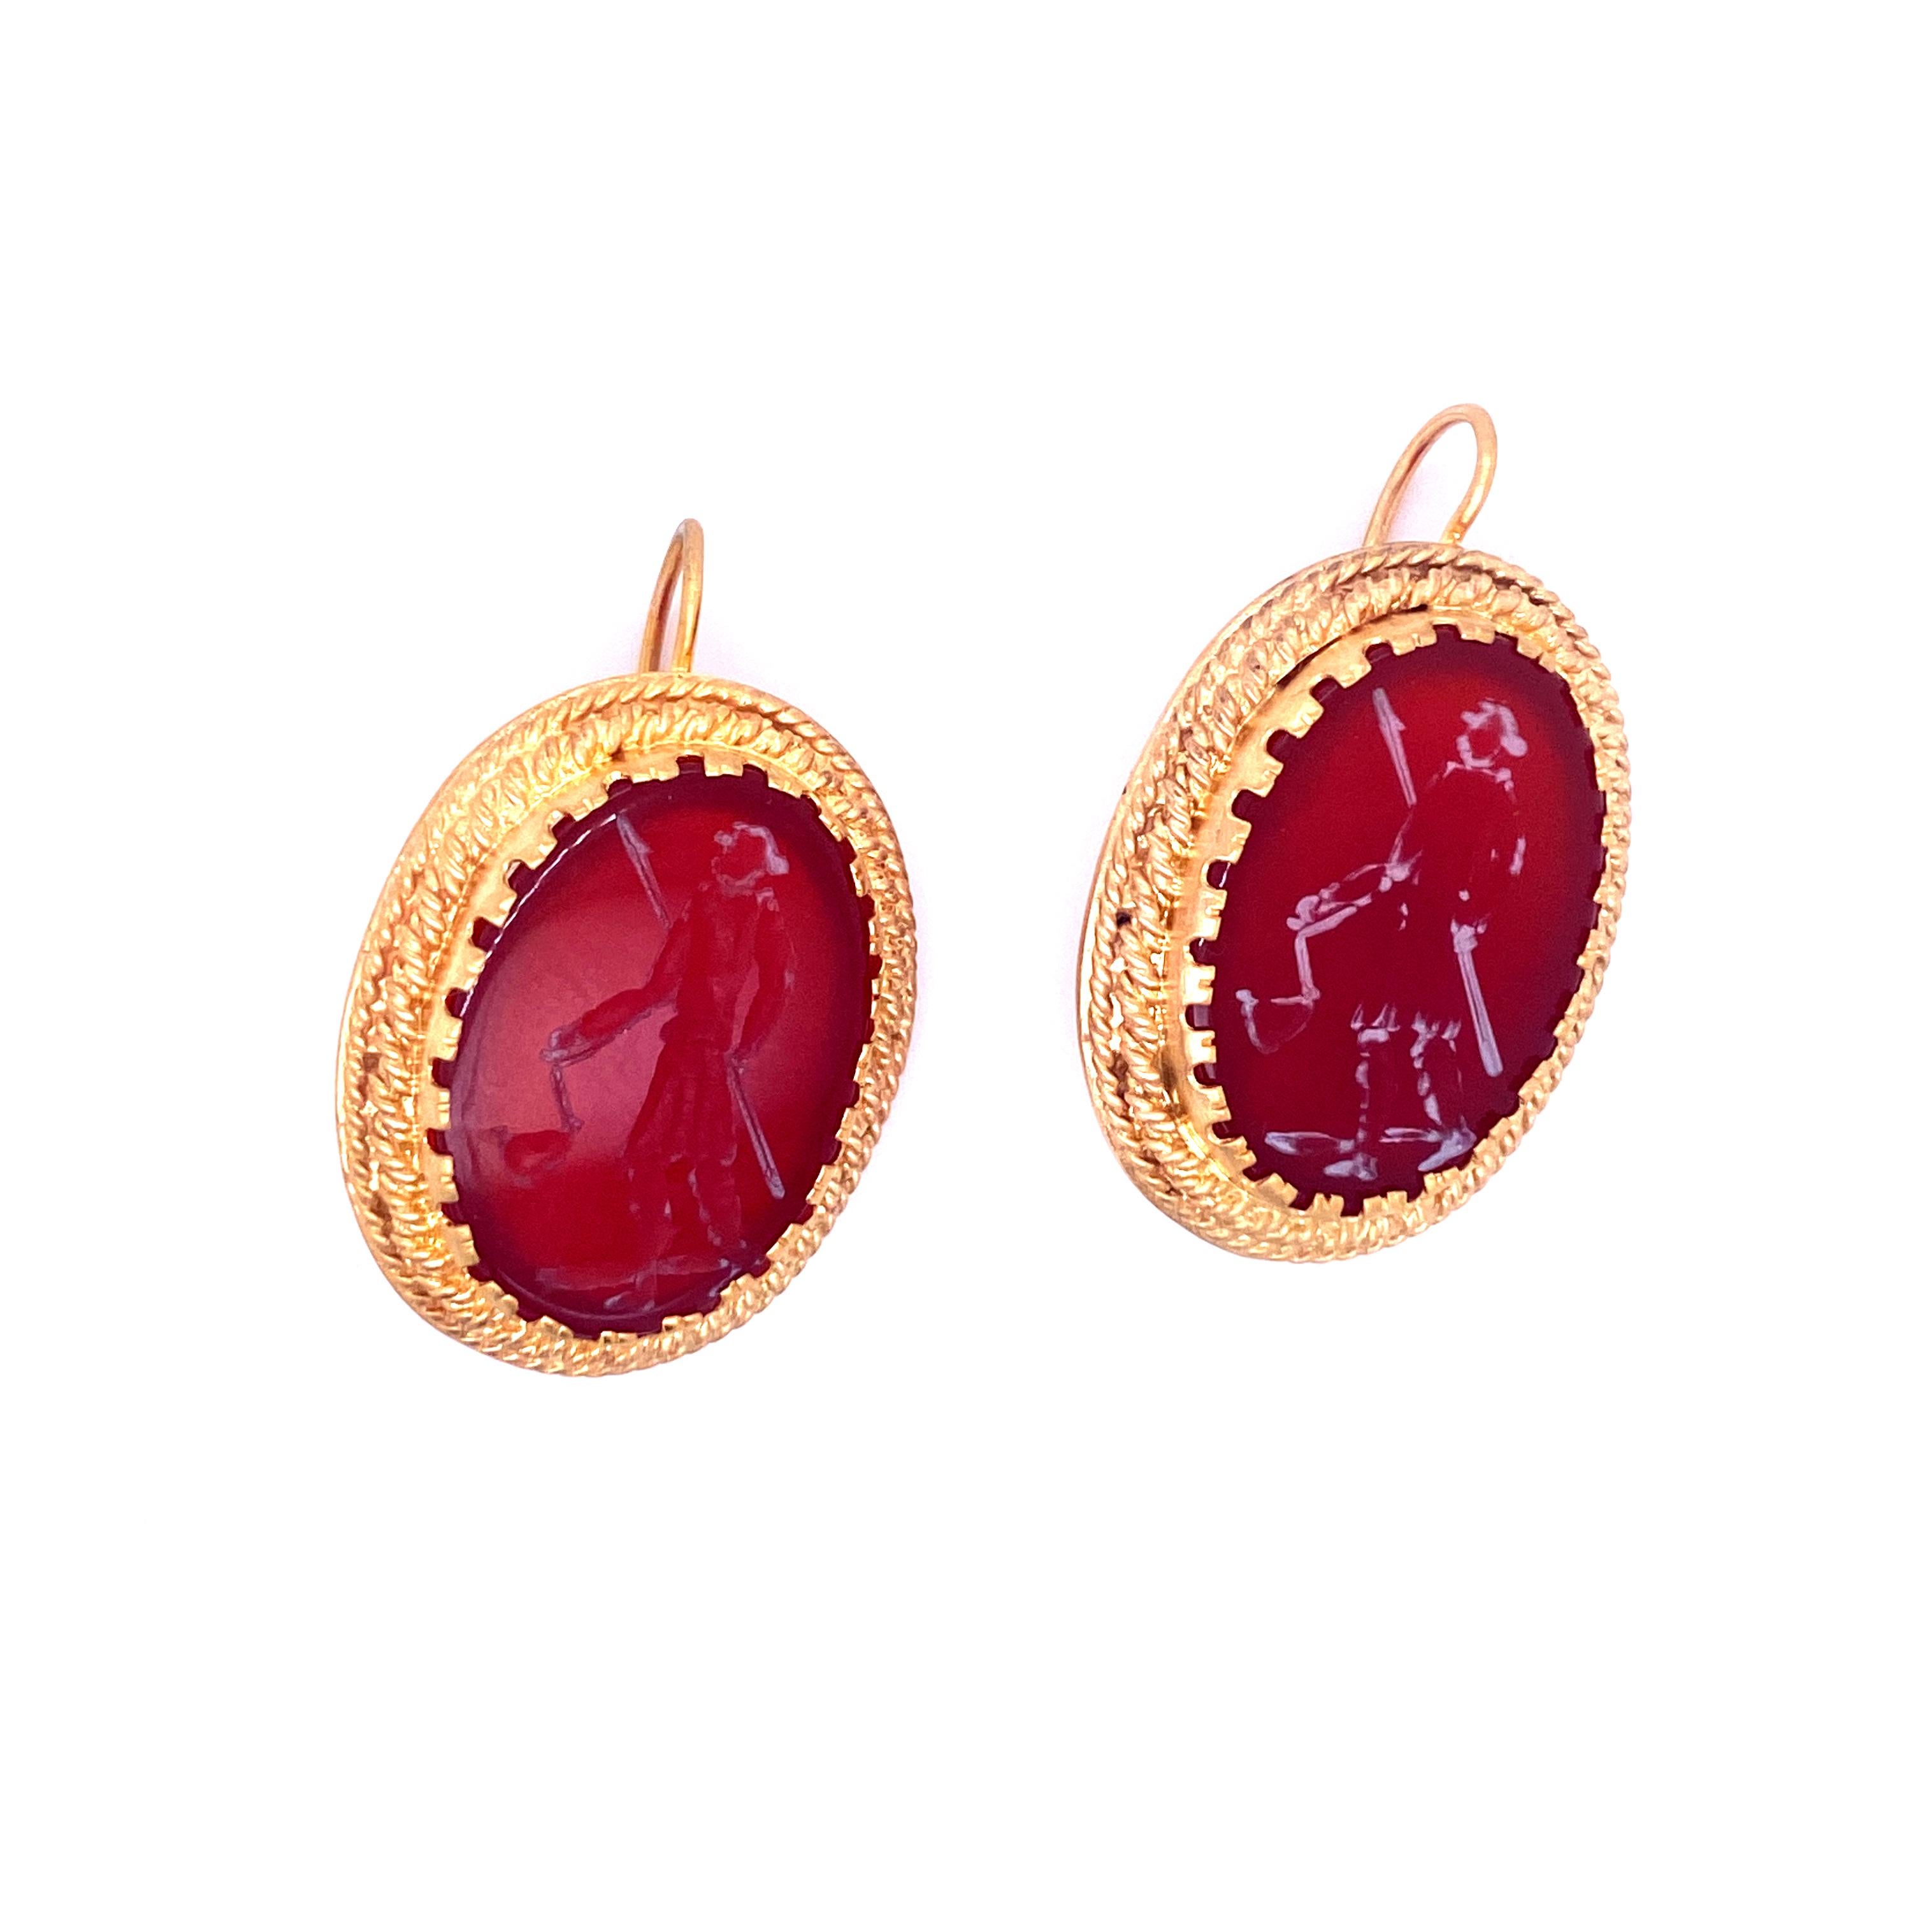 An unusual pair of vintage earrings, presenting two fine 19th century intaglios in Cornelian, framed in 18k yellow engraved Gold 
Origin Italy 1950

CONDITION: Pre-owned - Excellent 
METAL: 9k Gold
STONE: Diamond 0.50 total carats 
WEIGHT: 12 grams